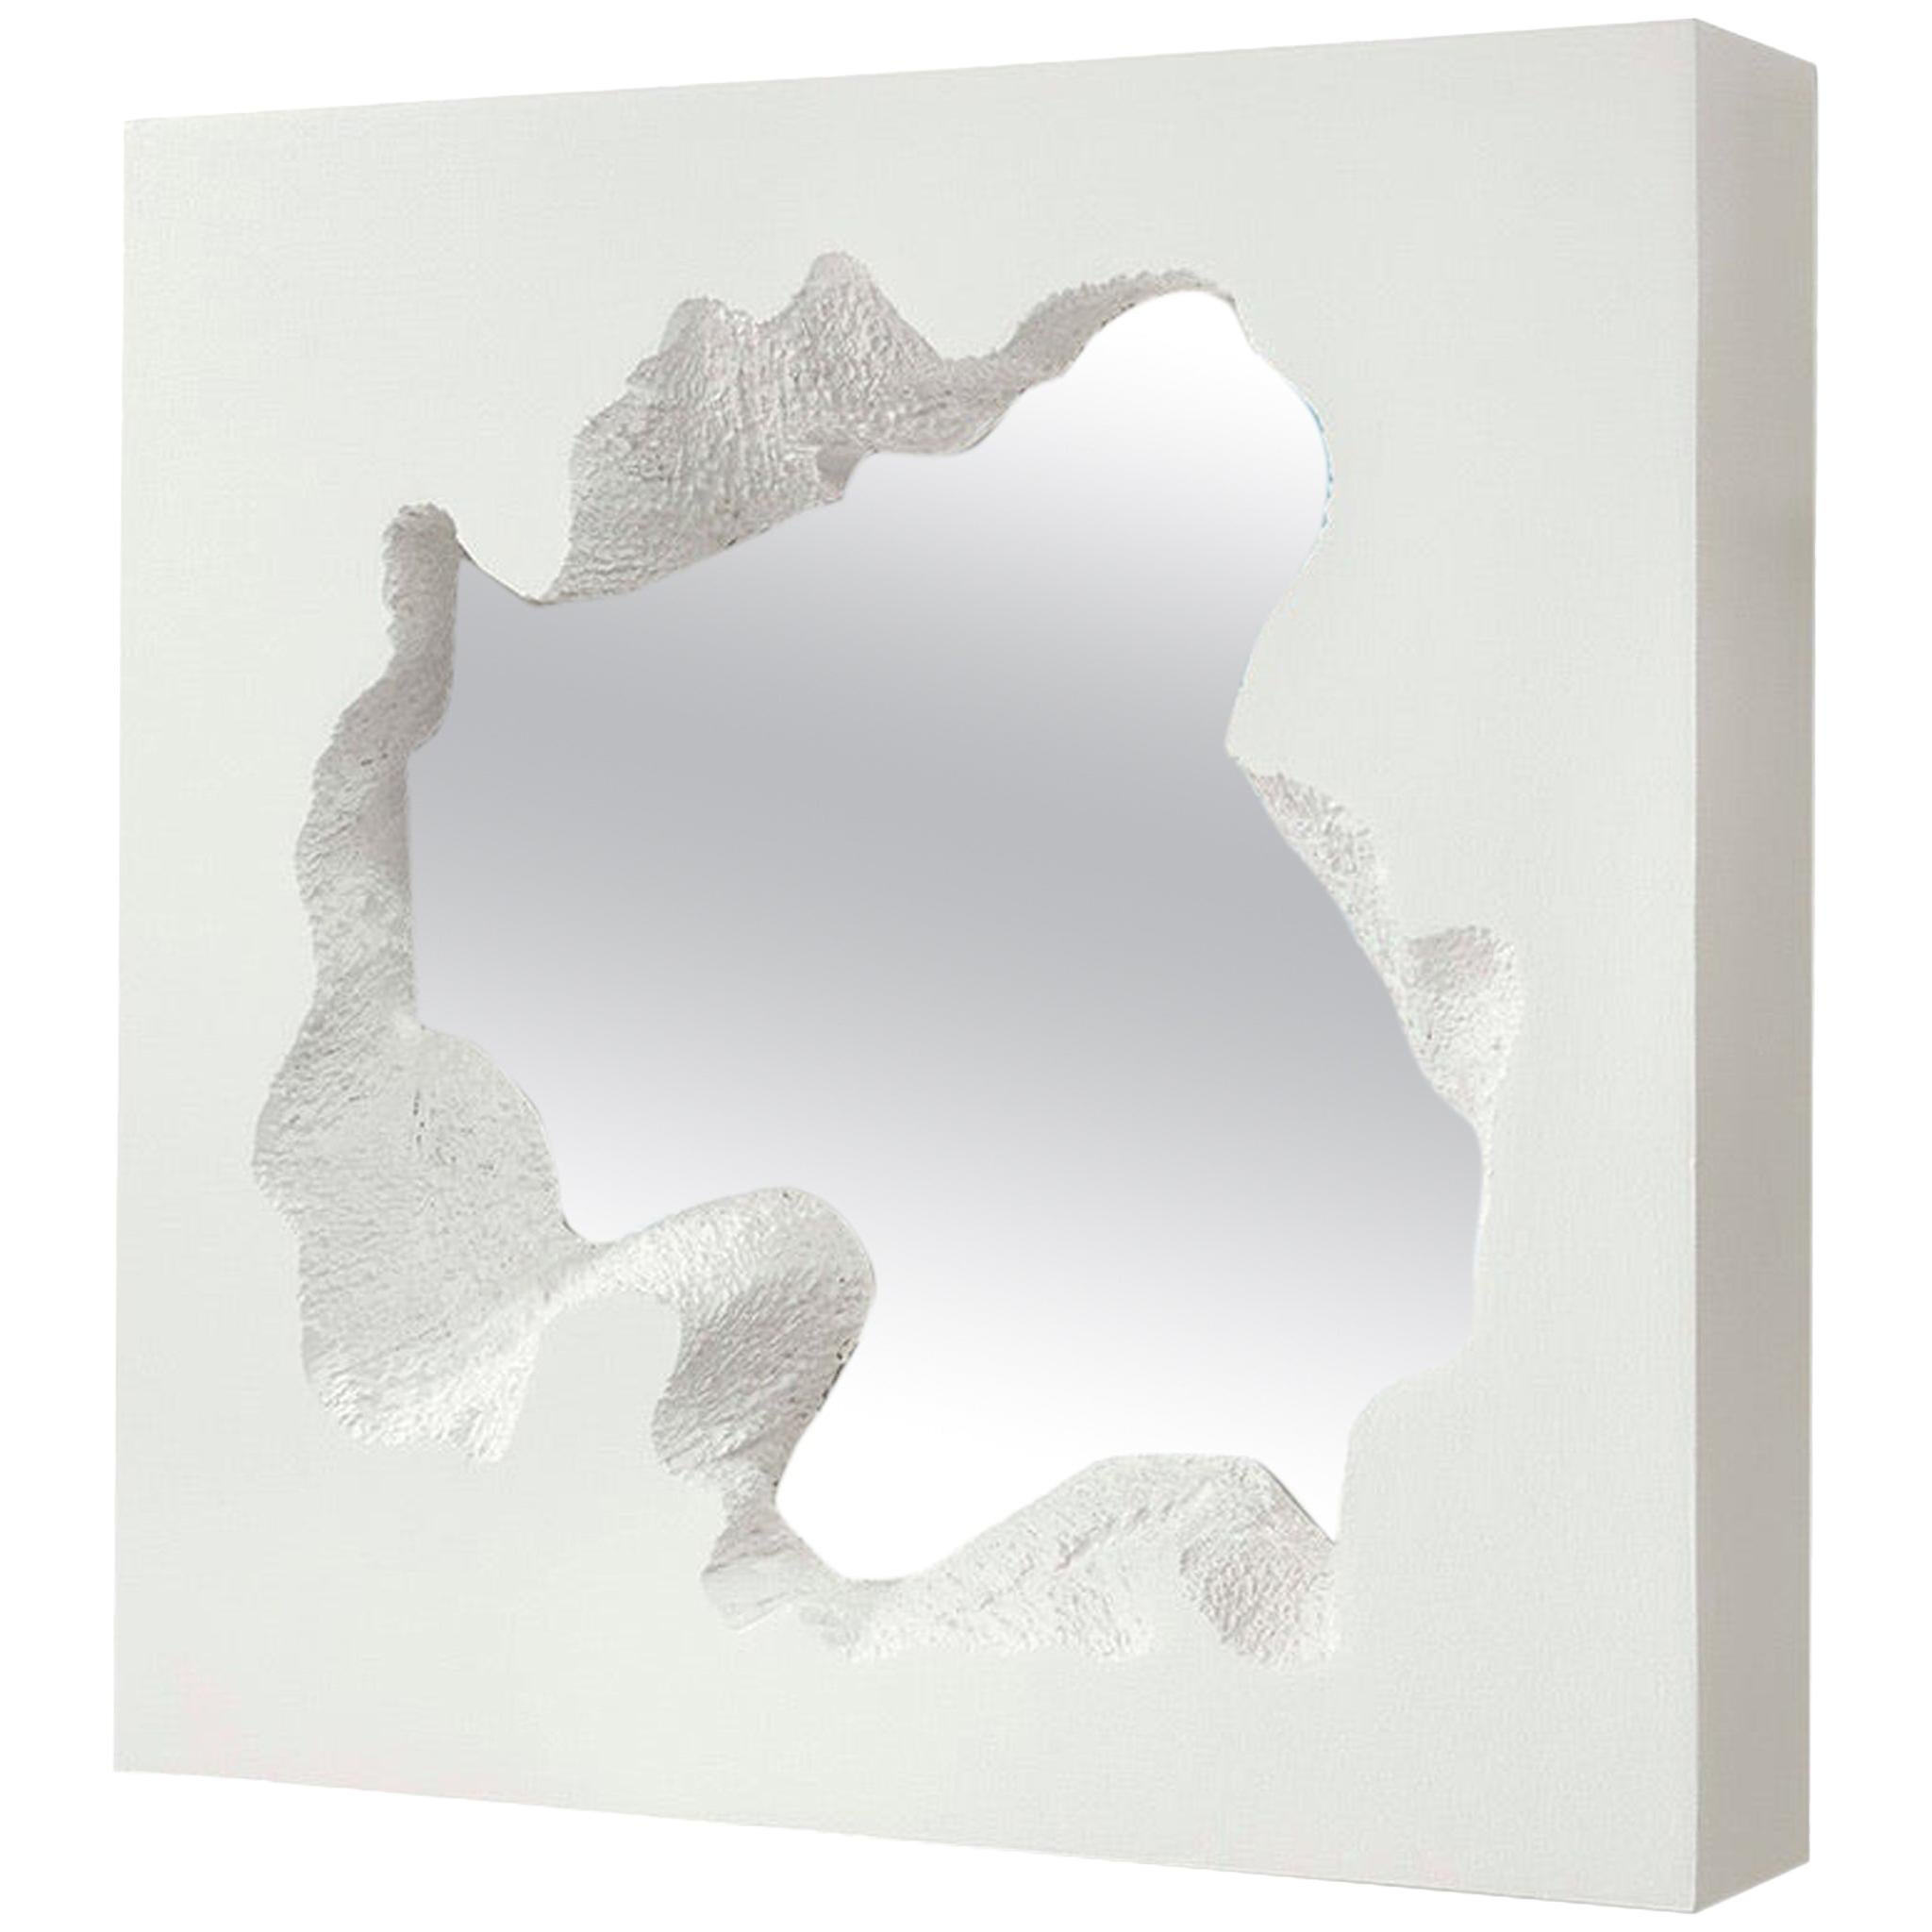 Gufram Broken Square Mirror White by Snarkitecture, Limited Edition of 77